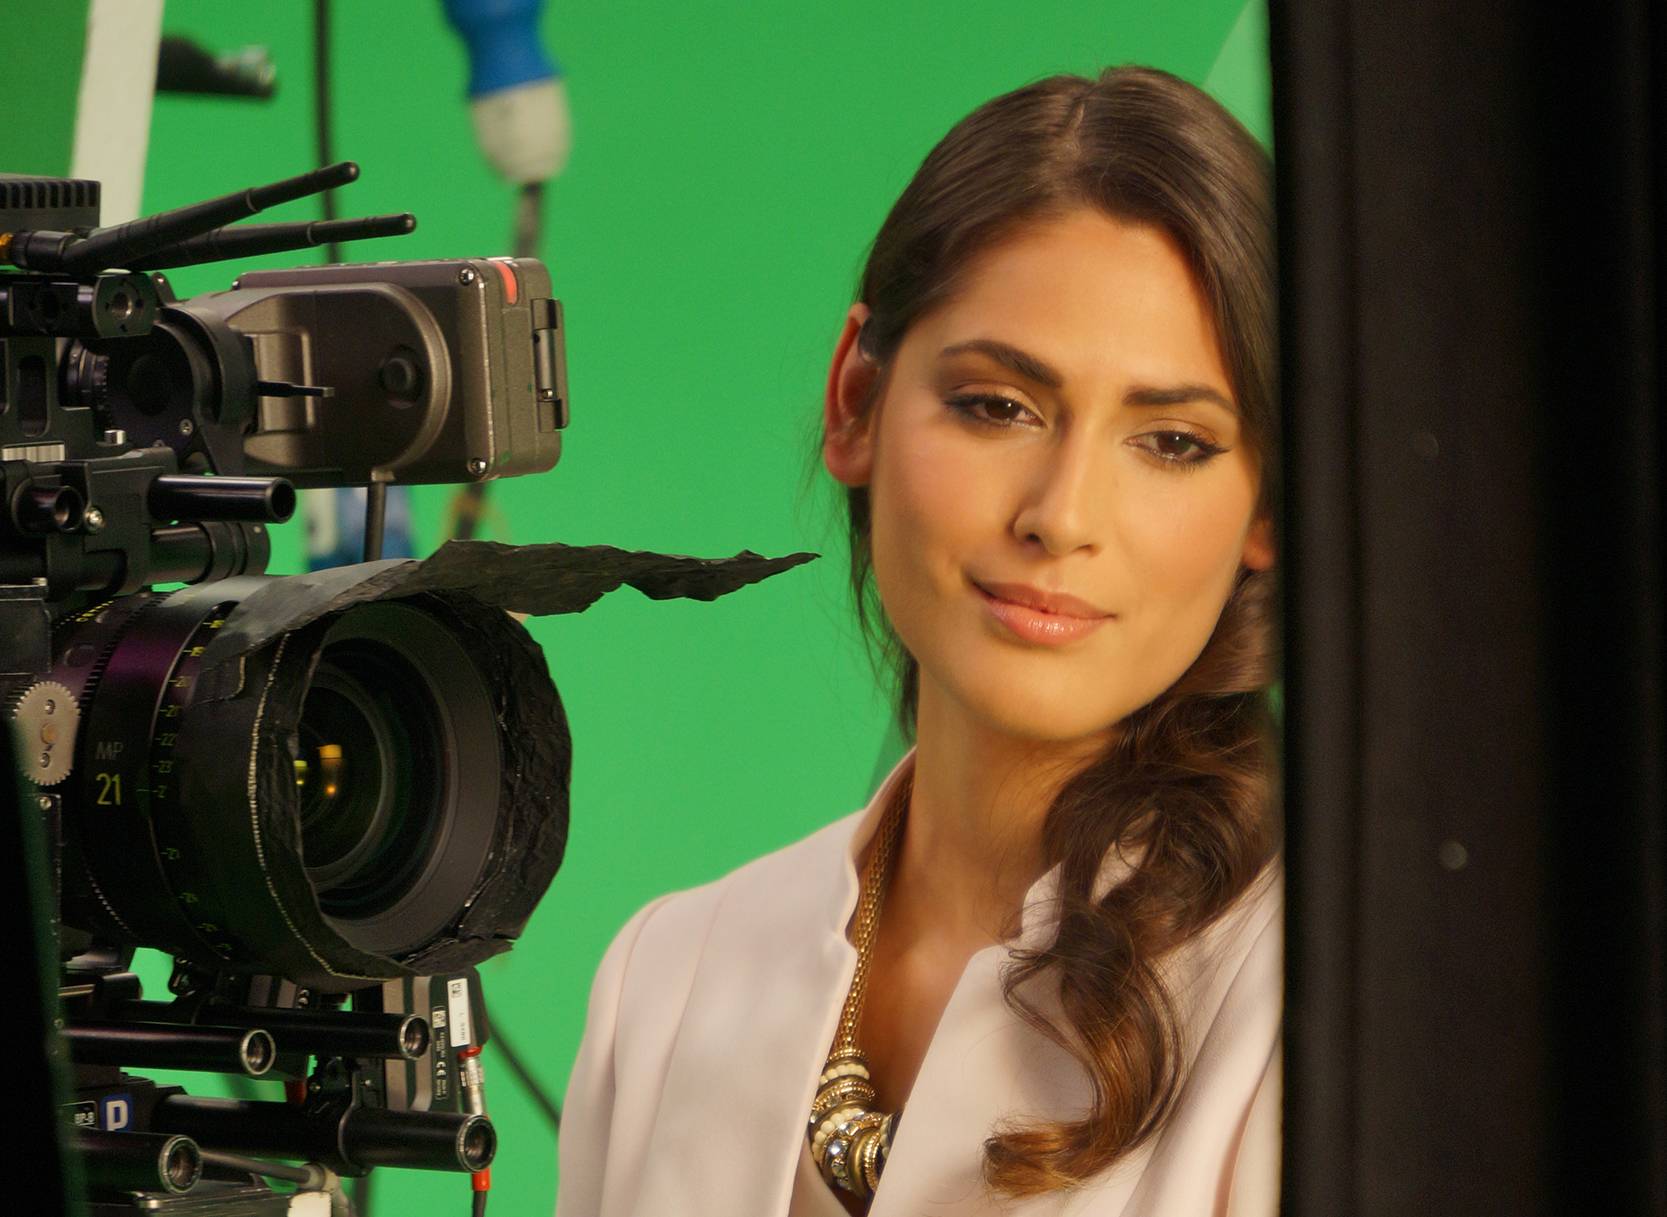 Woman at a film shoot in front of a camera with a green screen background